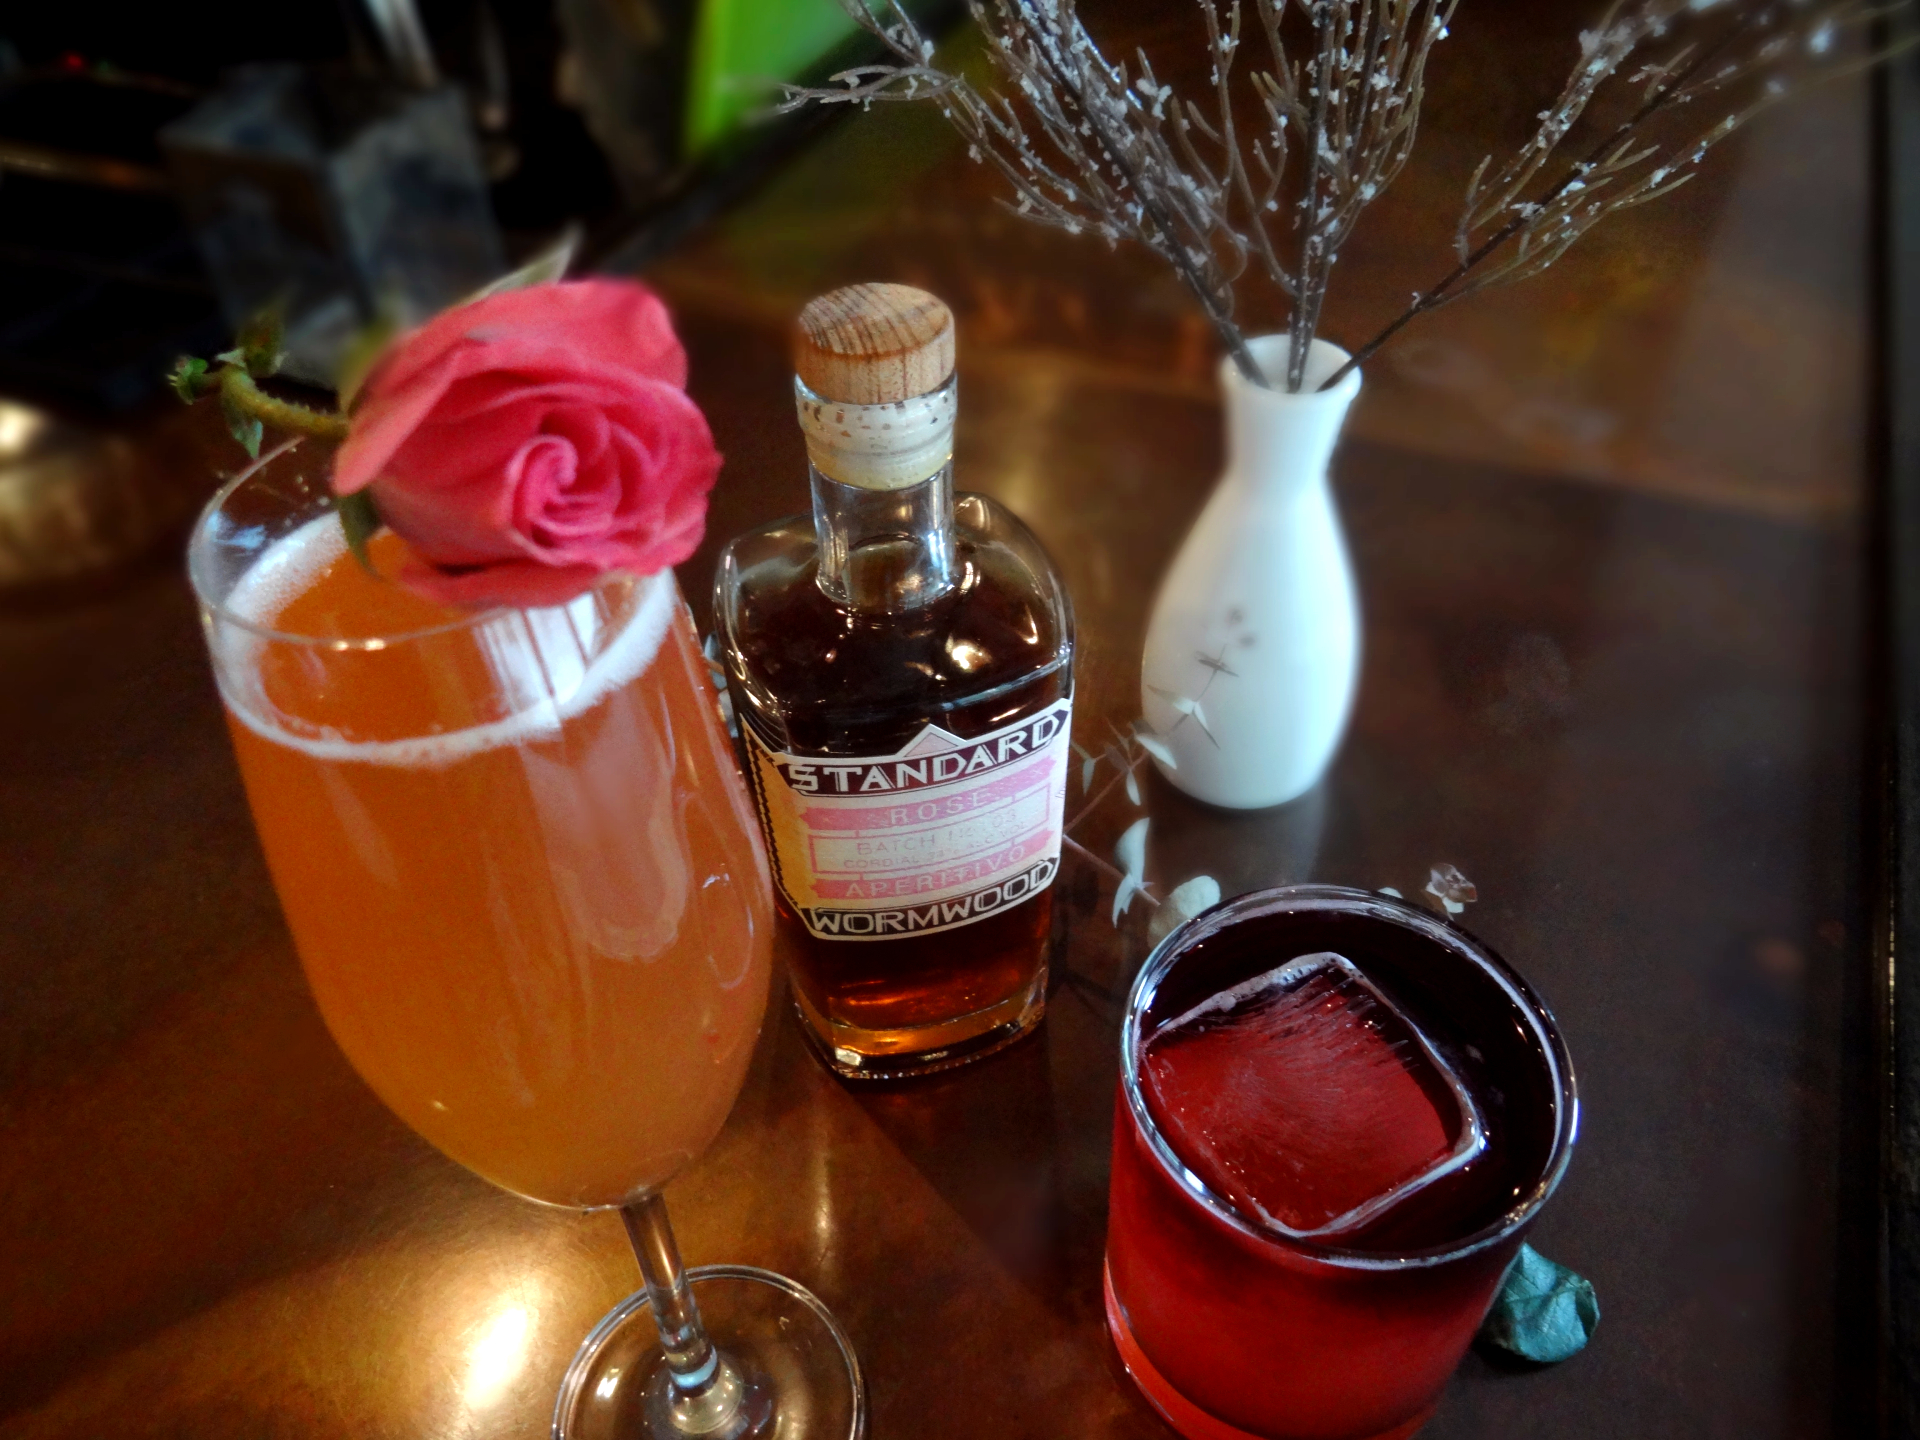 The Sinfonia Cocktail